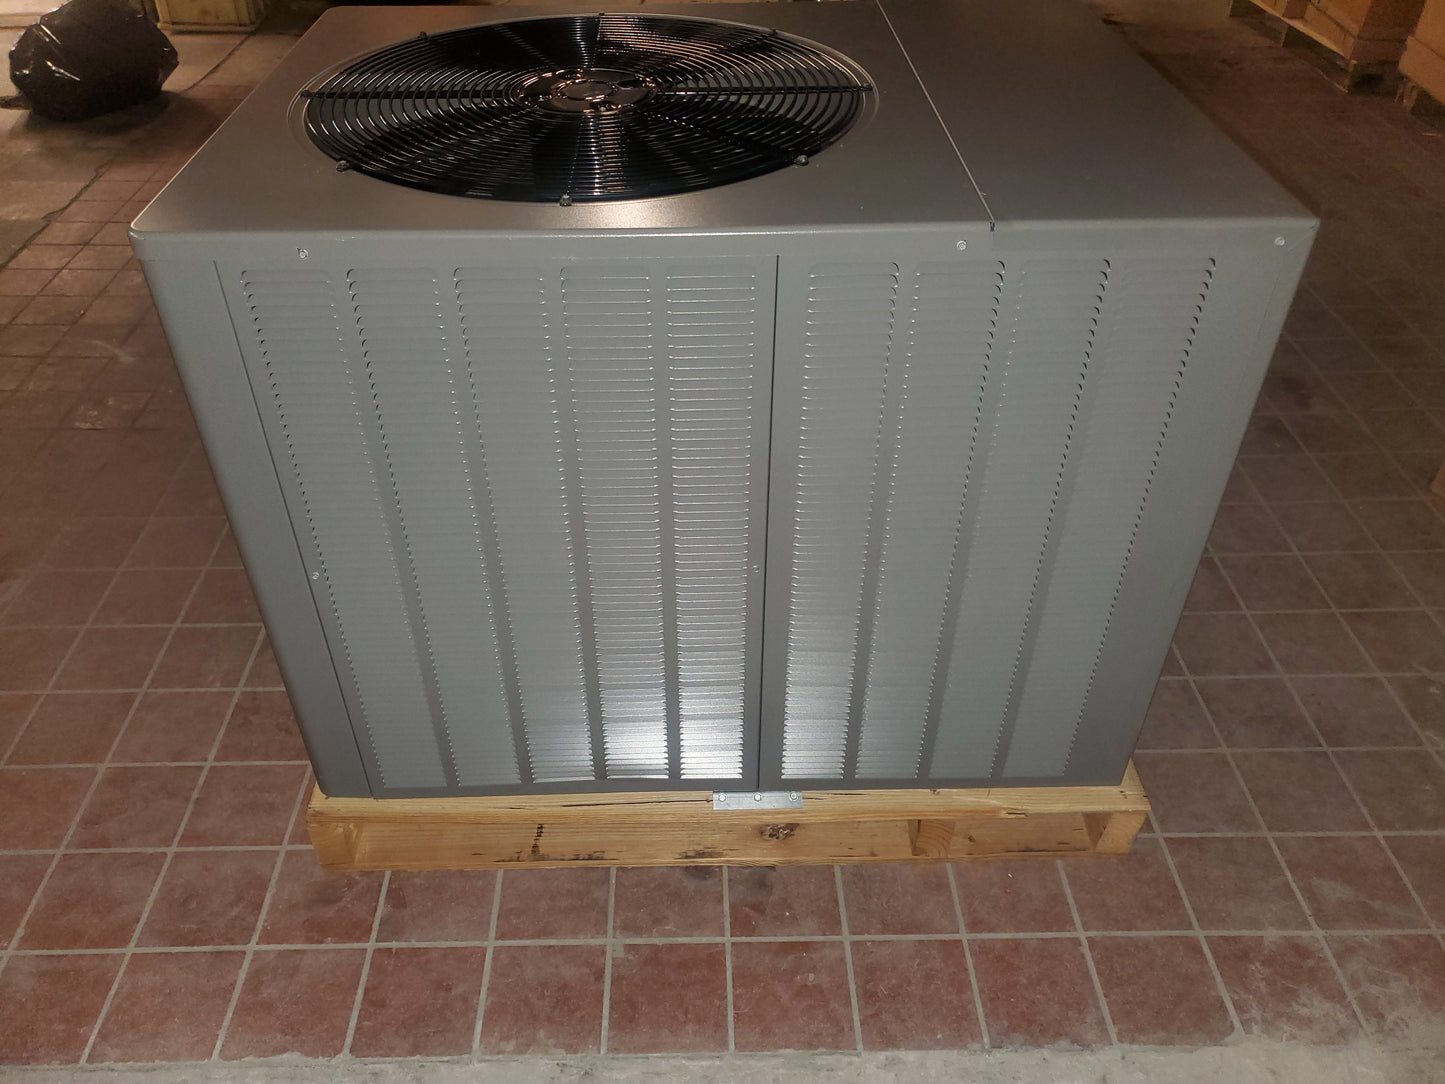 6-1/2 TON "HIGH EFFICIENCY COMMERCIAL" SPLIT-SYSTEM AIR CONDITIONER, 13 SEER 575/60/3 R-410A